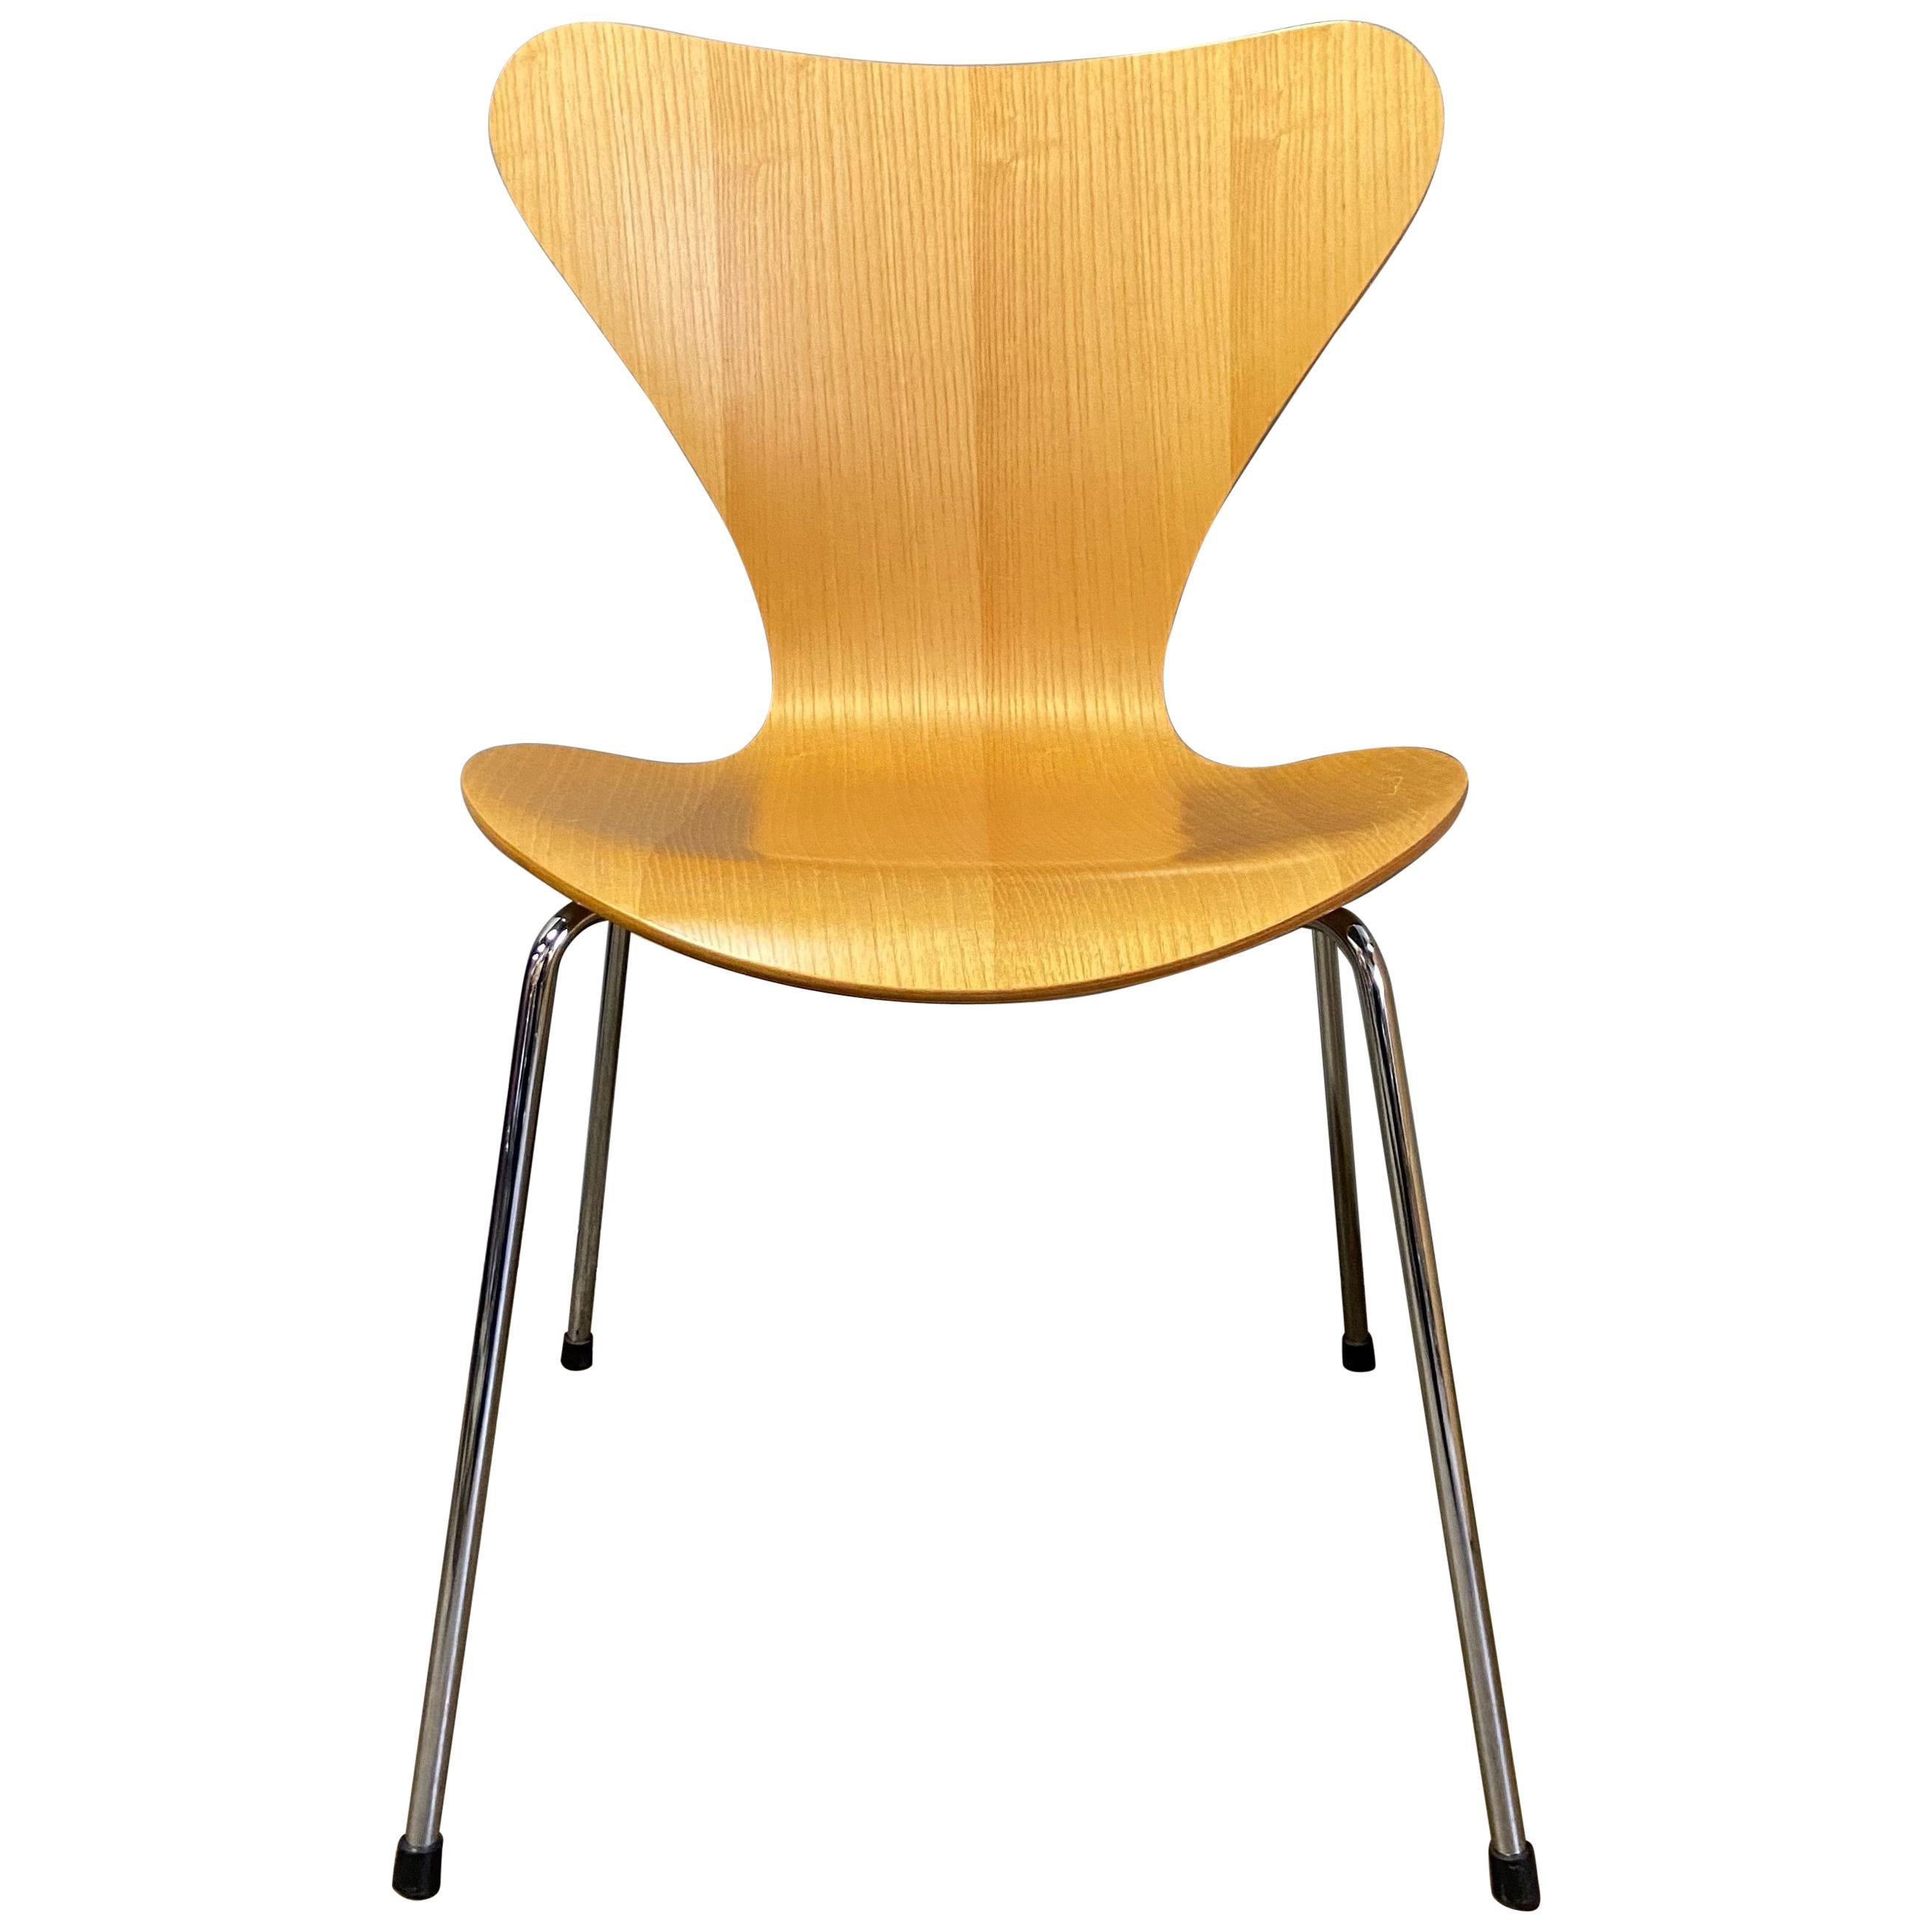 Midcentury Arne Jacobsen Series 7 Chairs For Sale